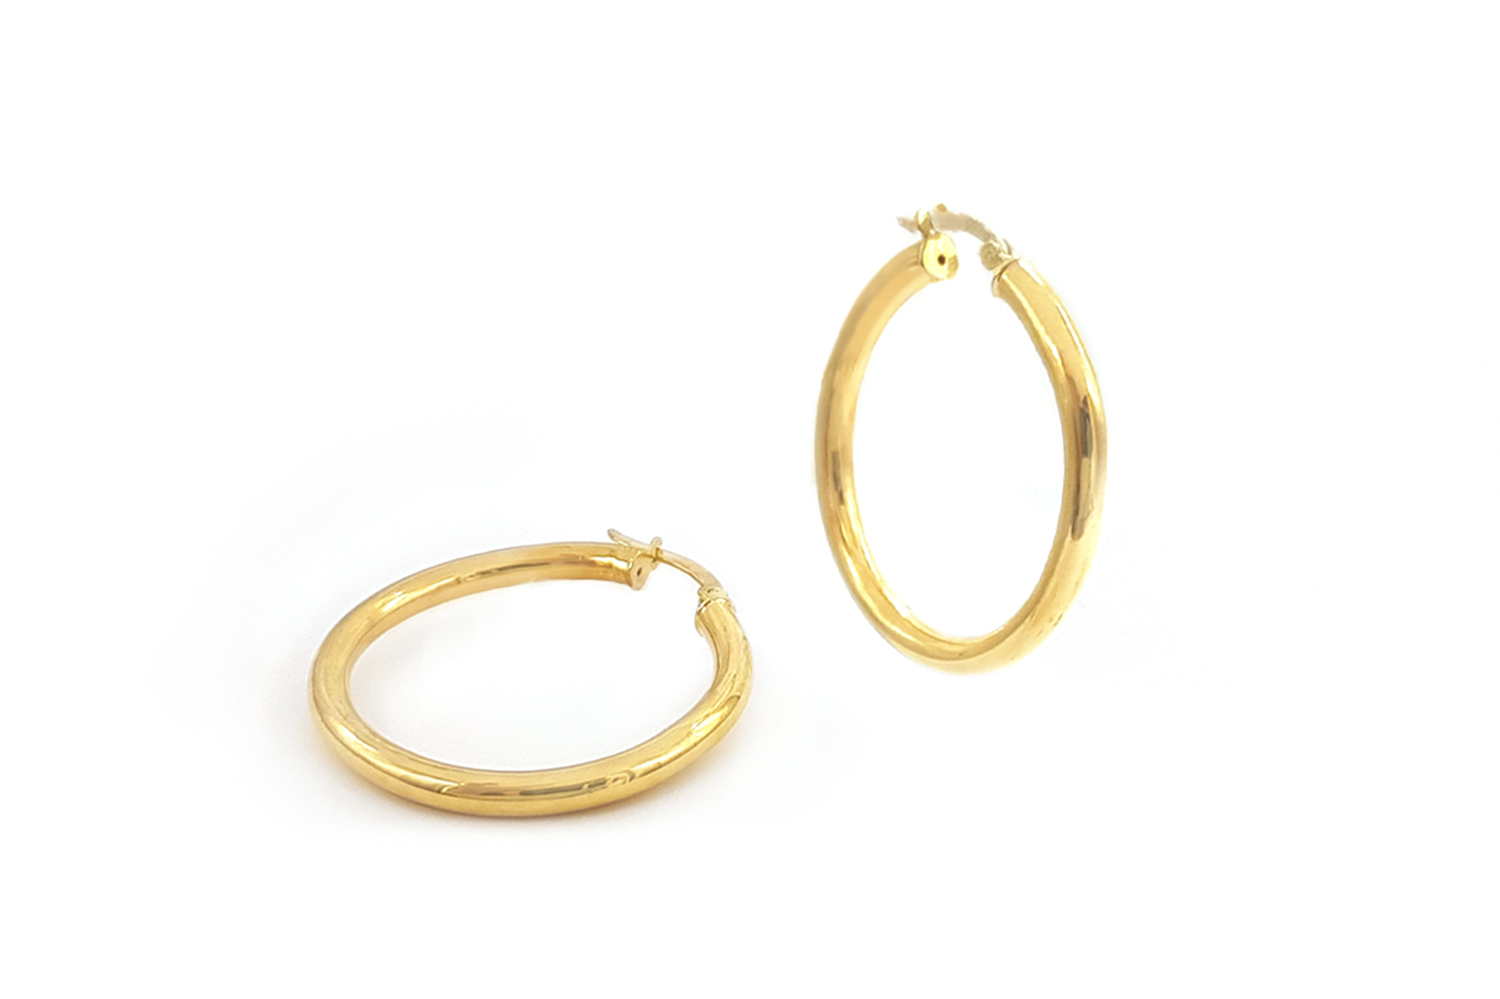 Shop Rubans Gold Plated Handcrafted Twisted Hoop Earrings Online at Rubans